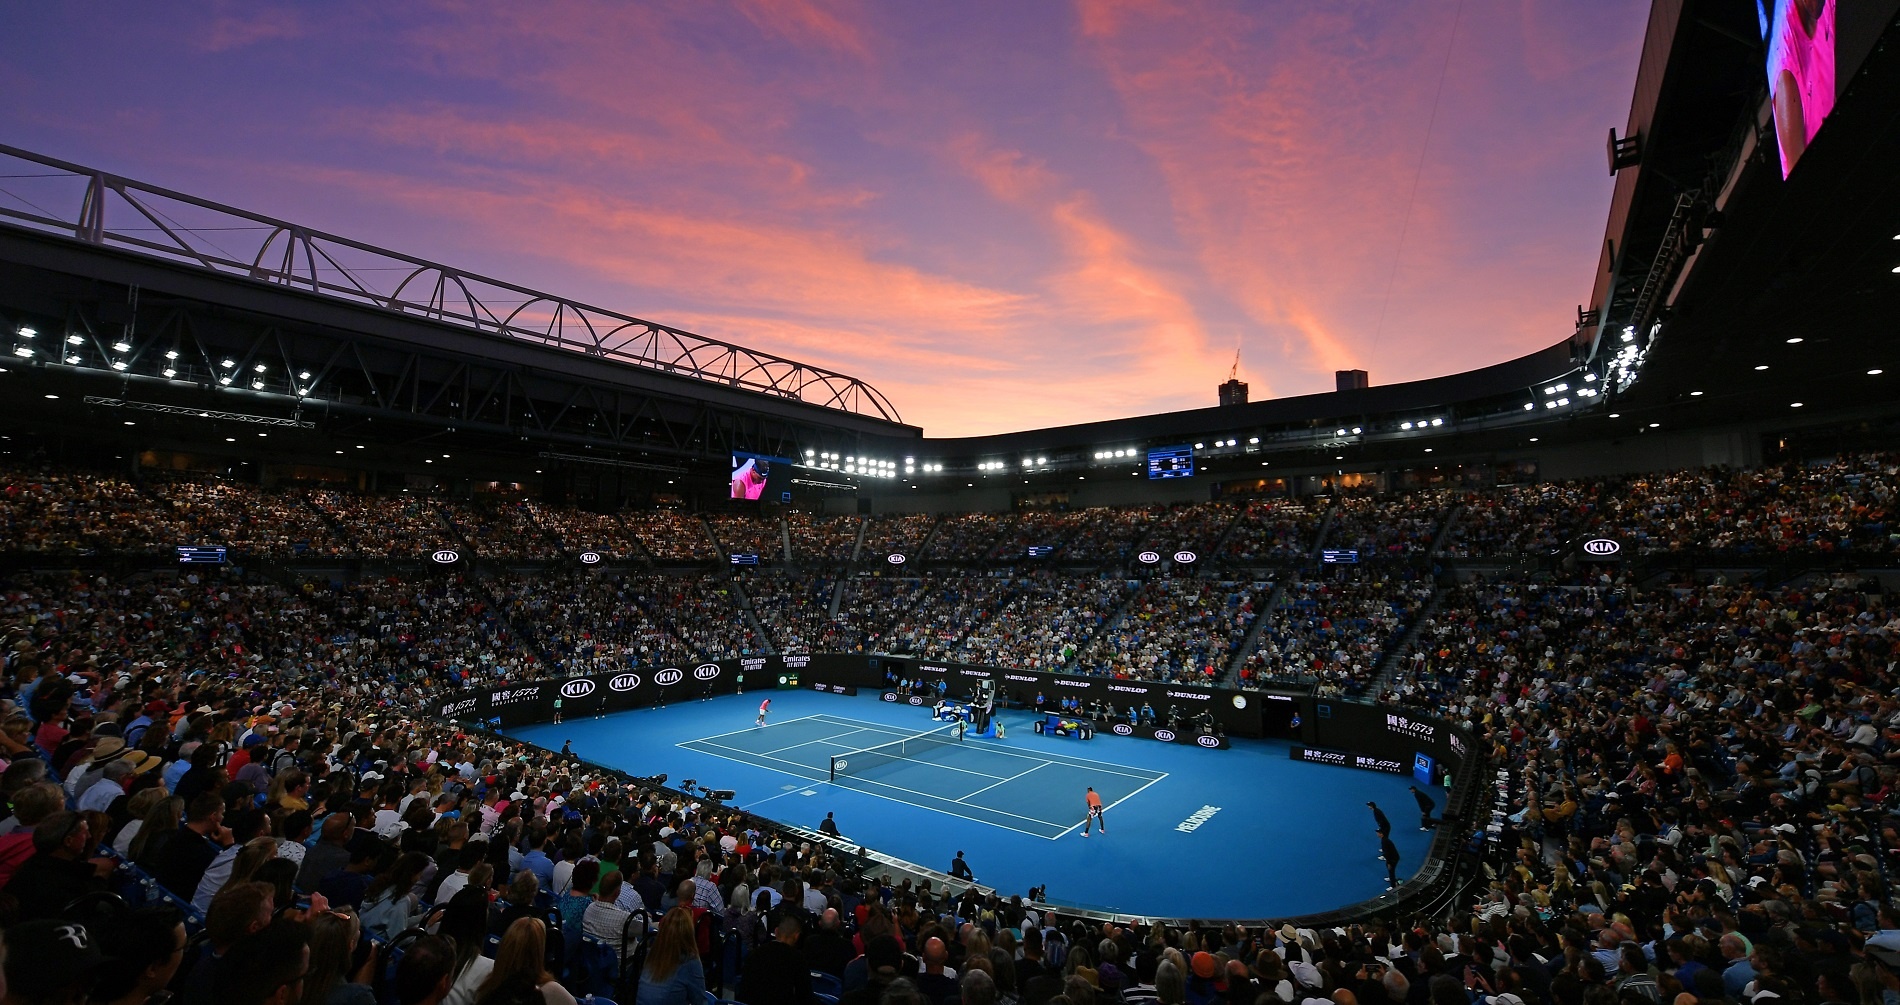 10 questions about the 2021 Australian Open - Tickets, schedule, TV broadcasts, prize money